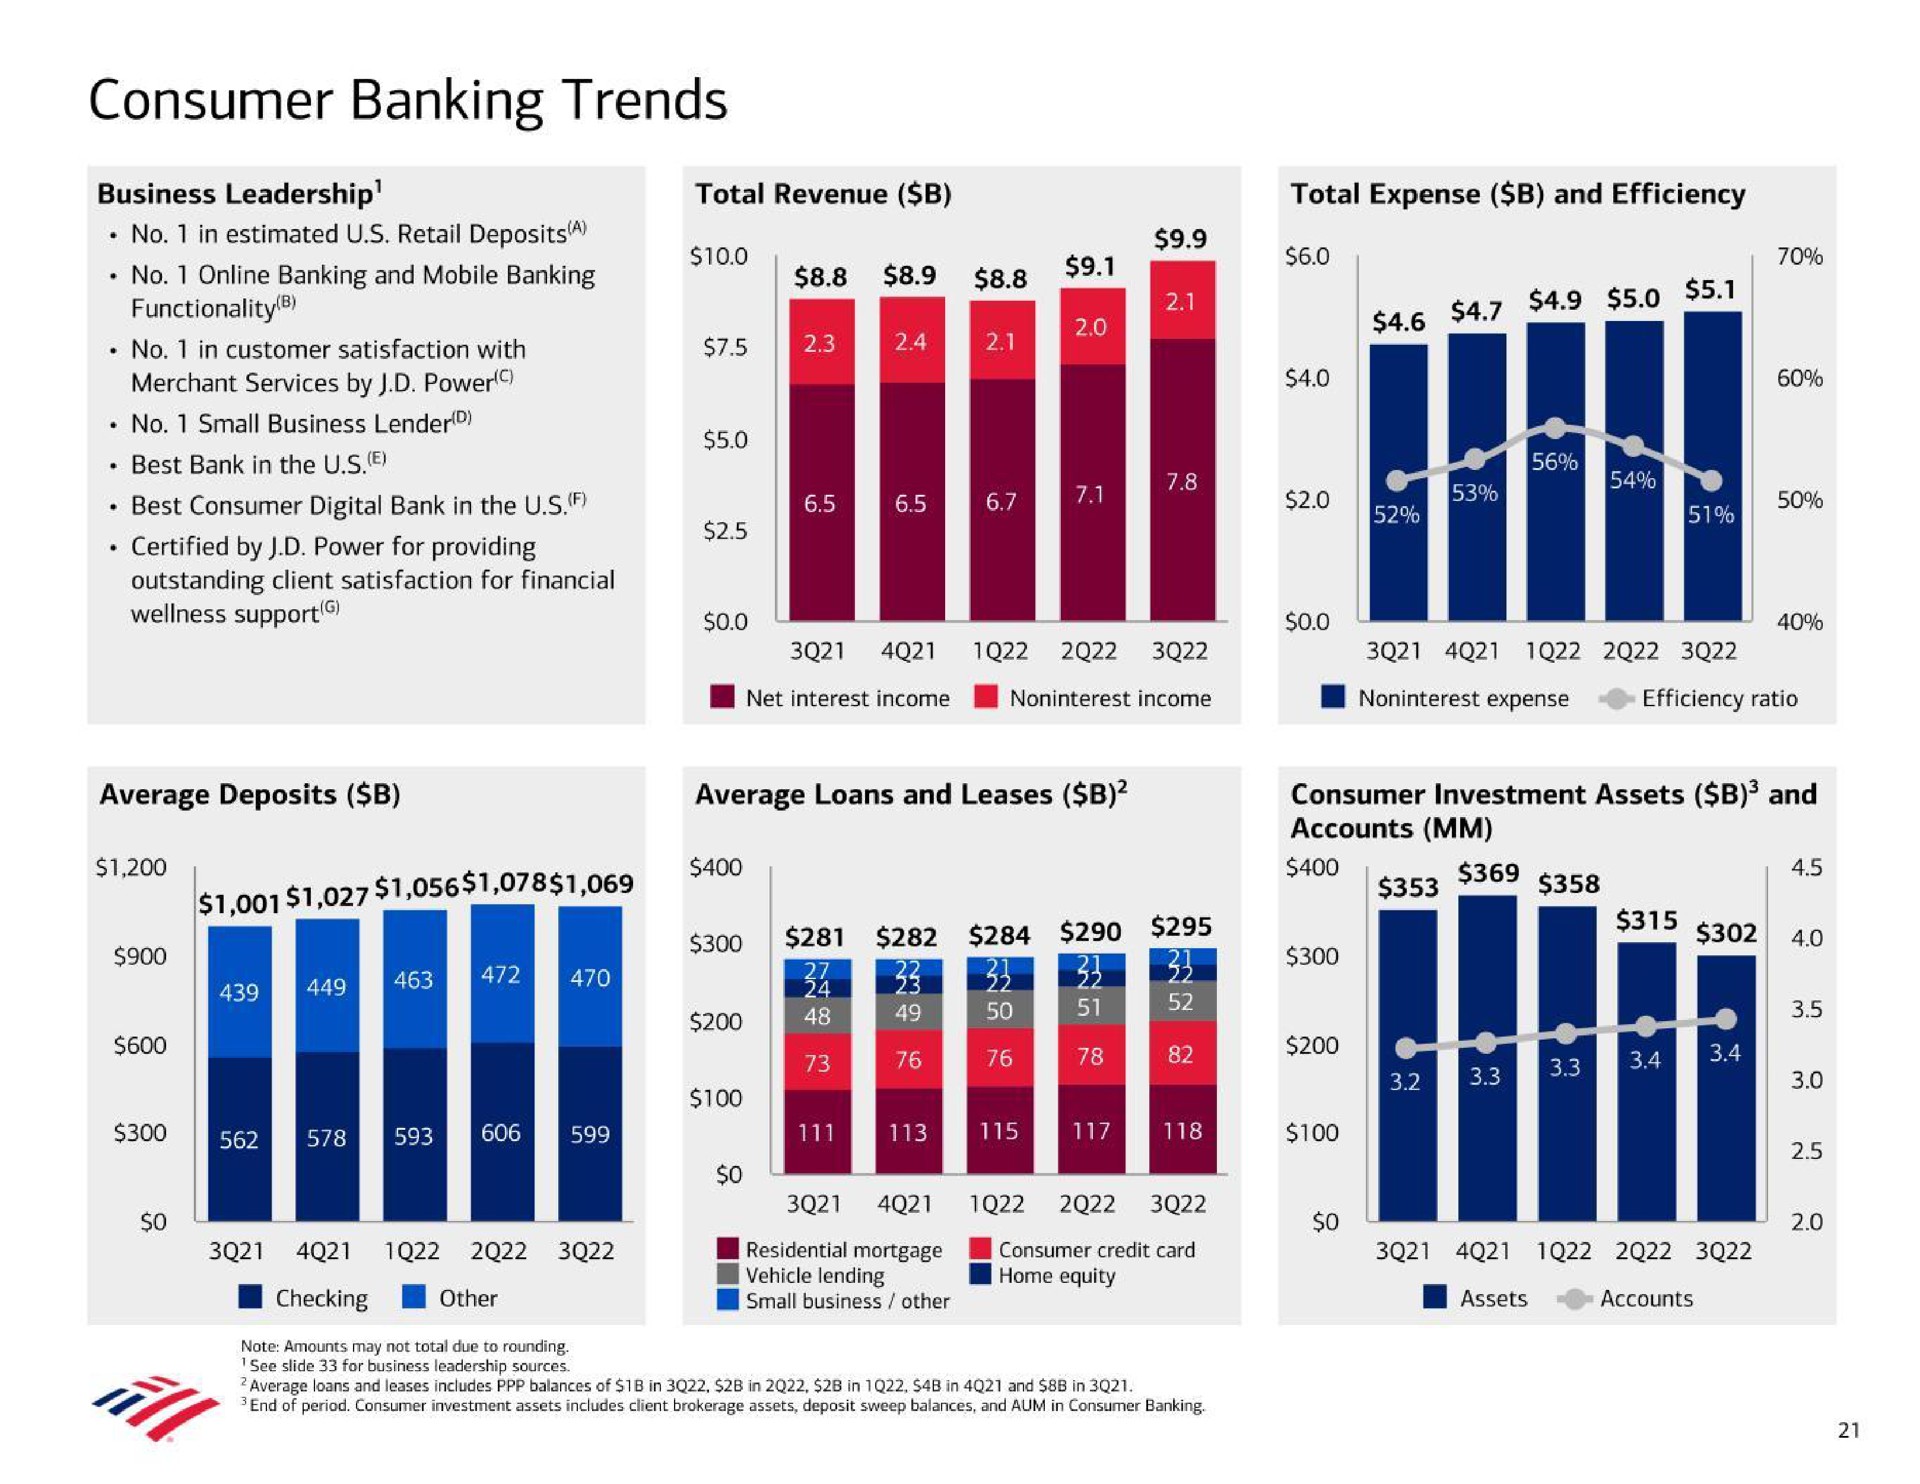 consumer banking trends no banking and mobile banking functionality no in customer satisfaction with merchant services by power best bank in the best consumer digital bank in the wellness support i a ora be ara a mae am i | Bank of America